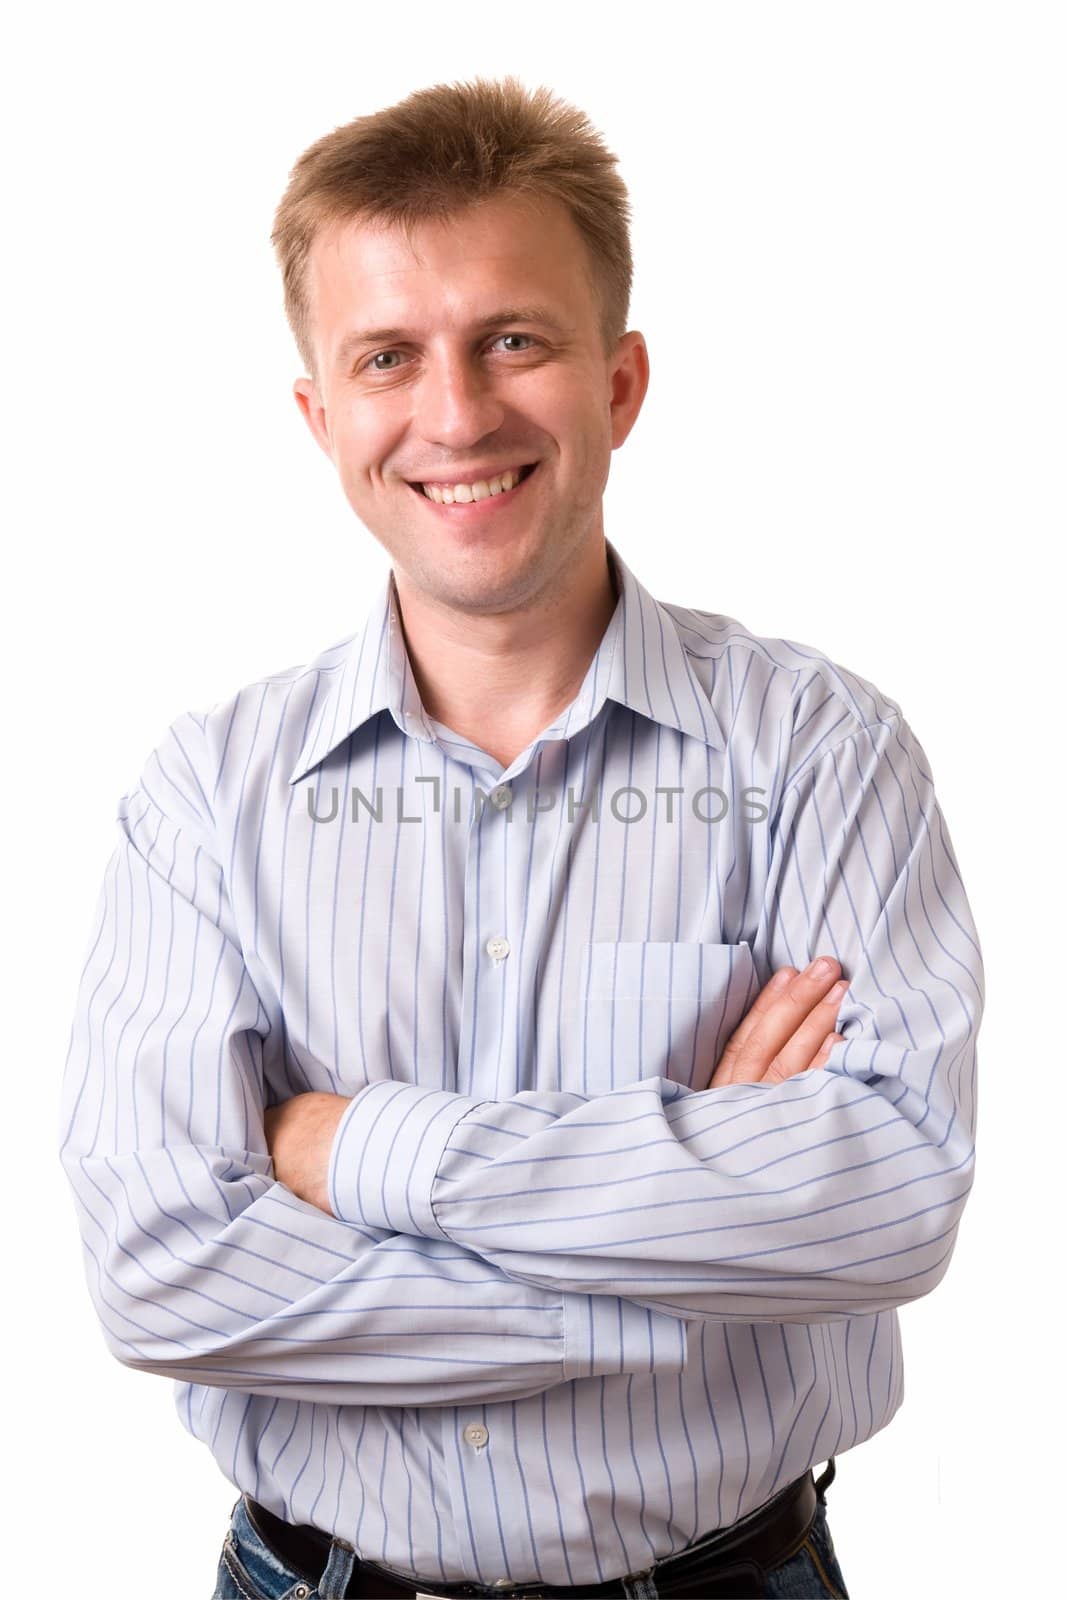 young smiling man on a white background.
